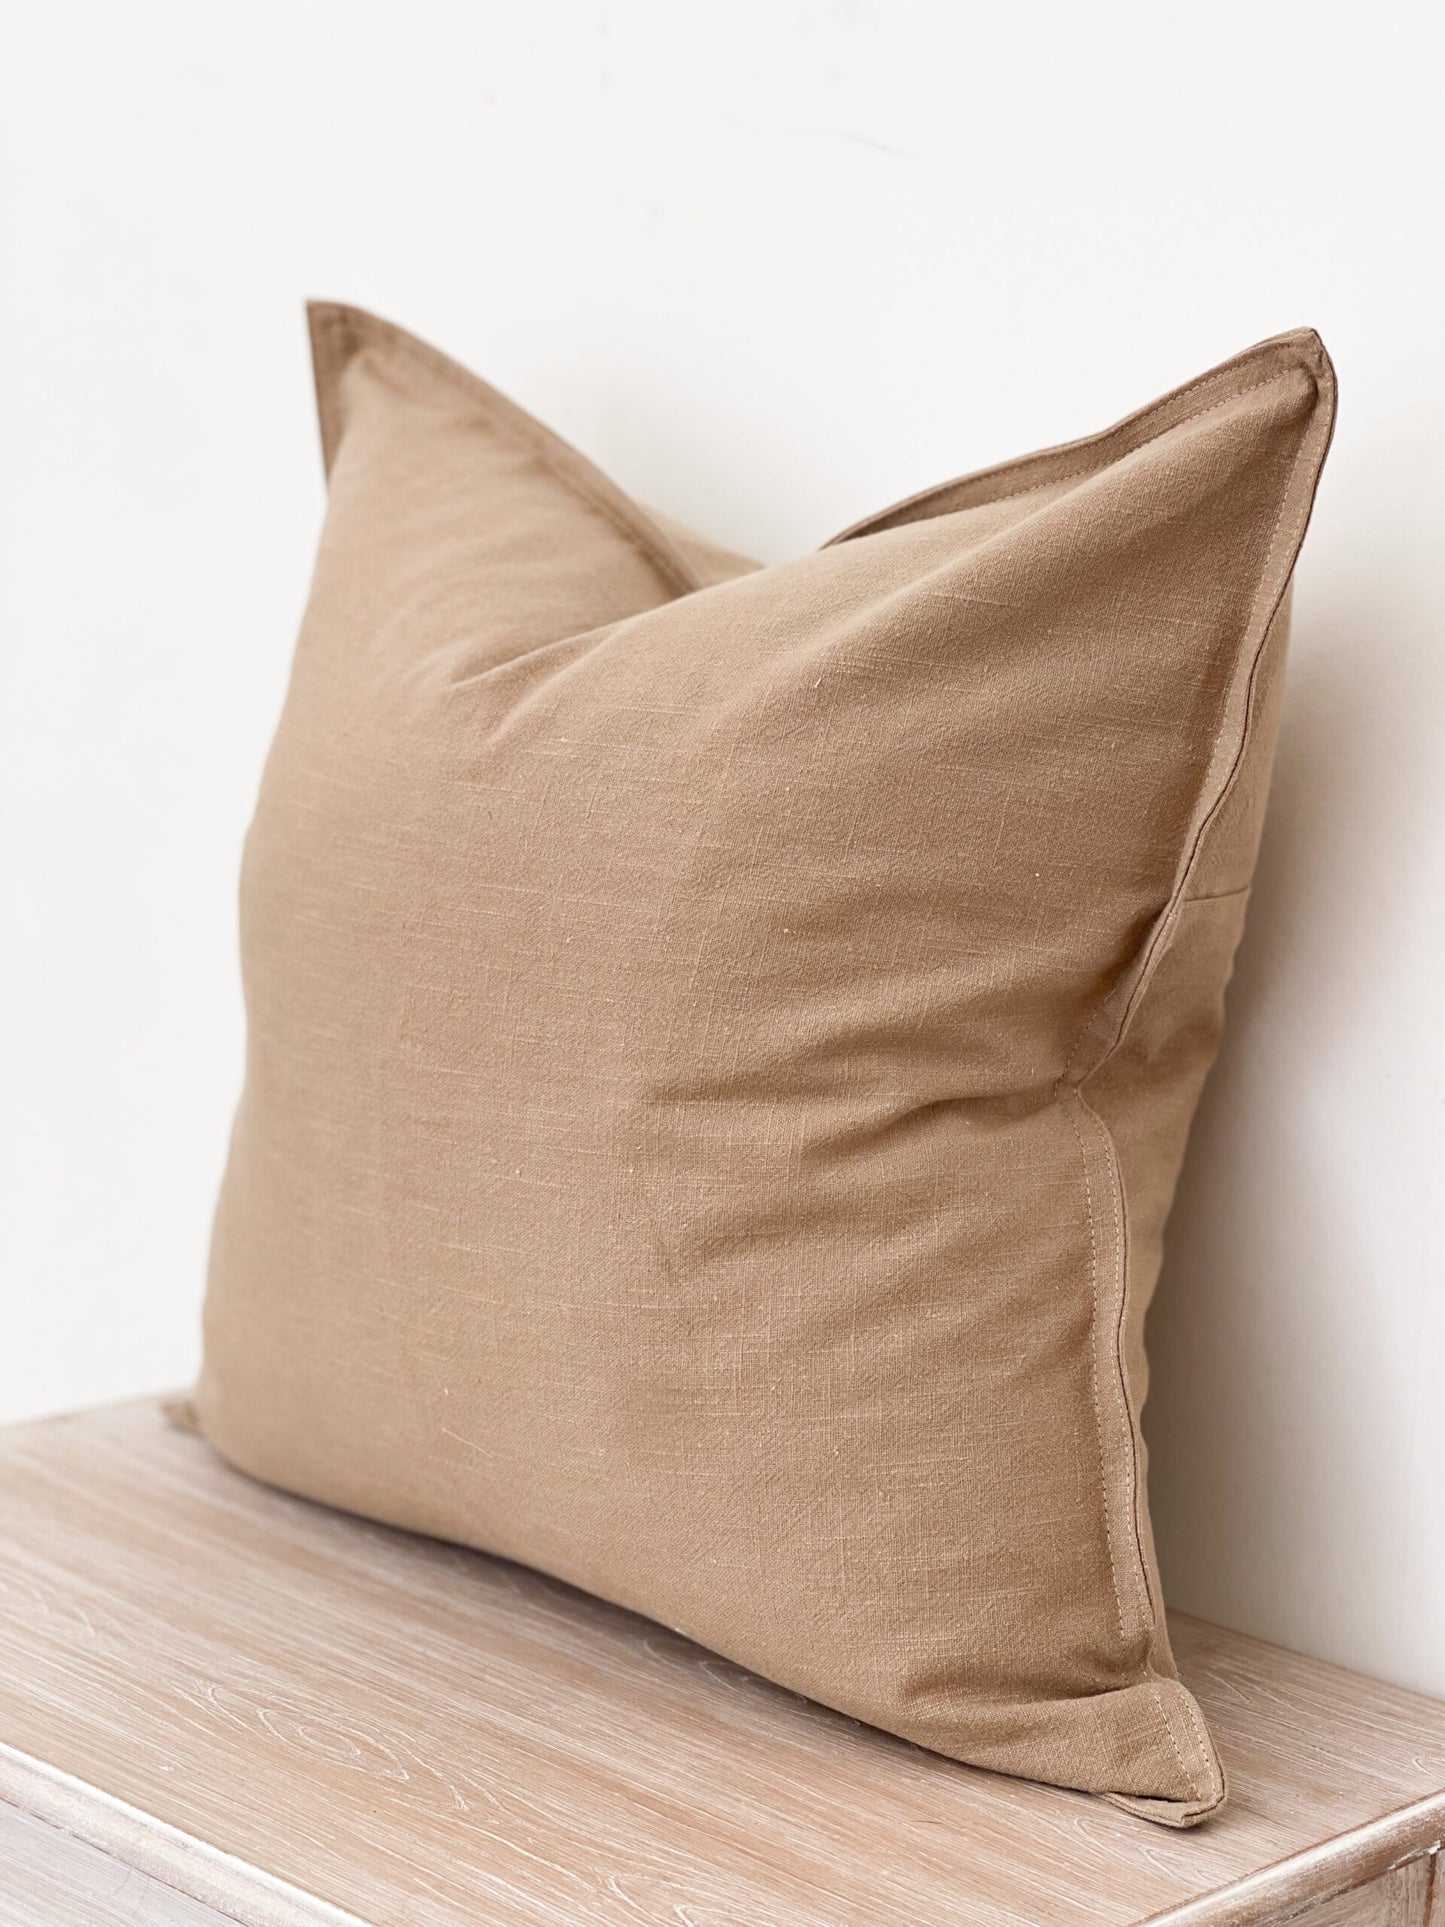 Alice Cushion Cover in Beige (45x45cm)